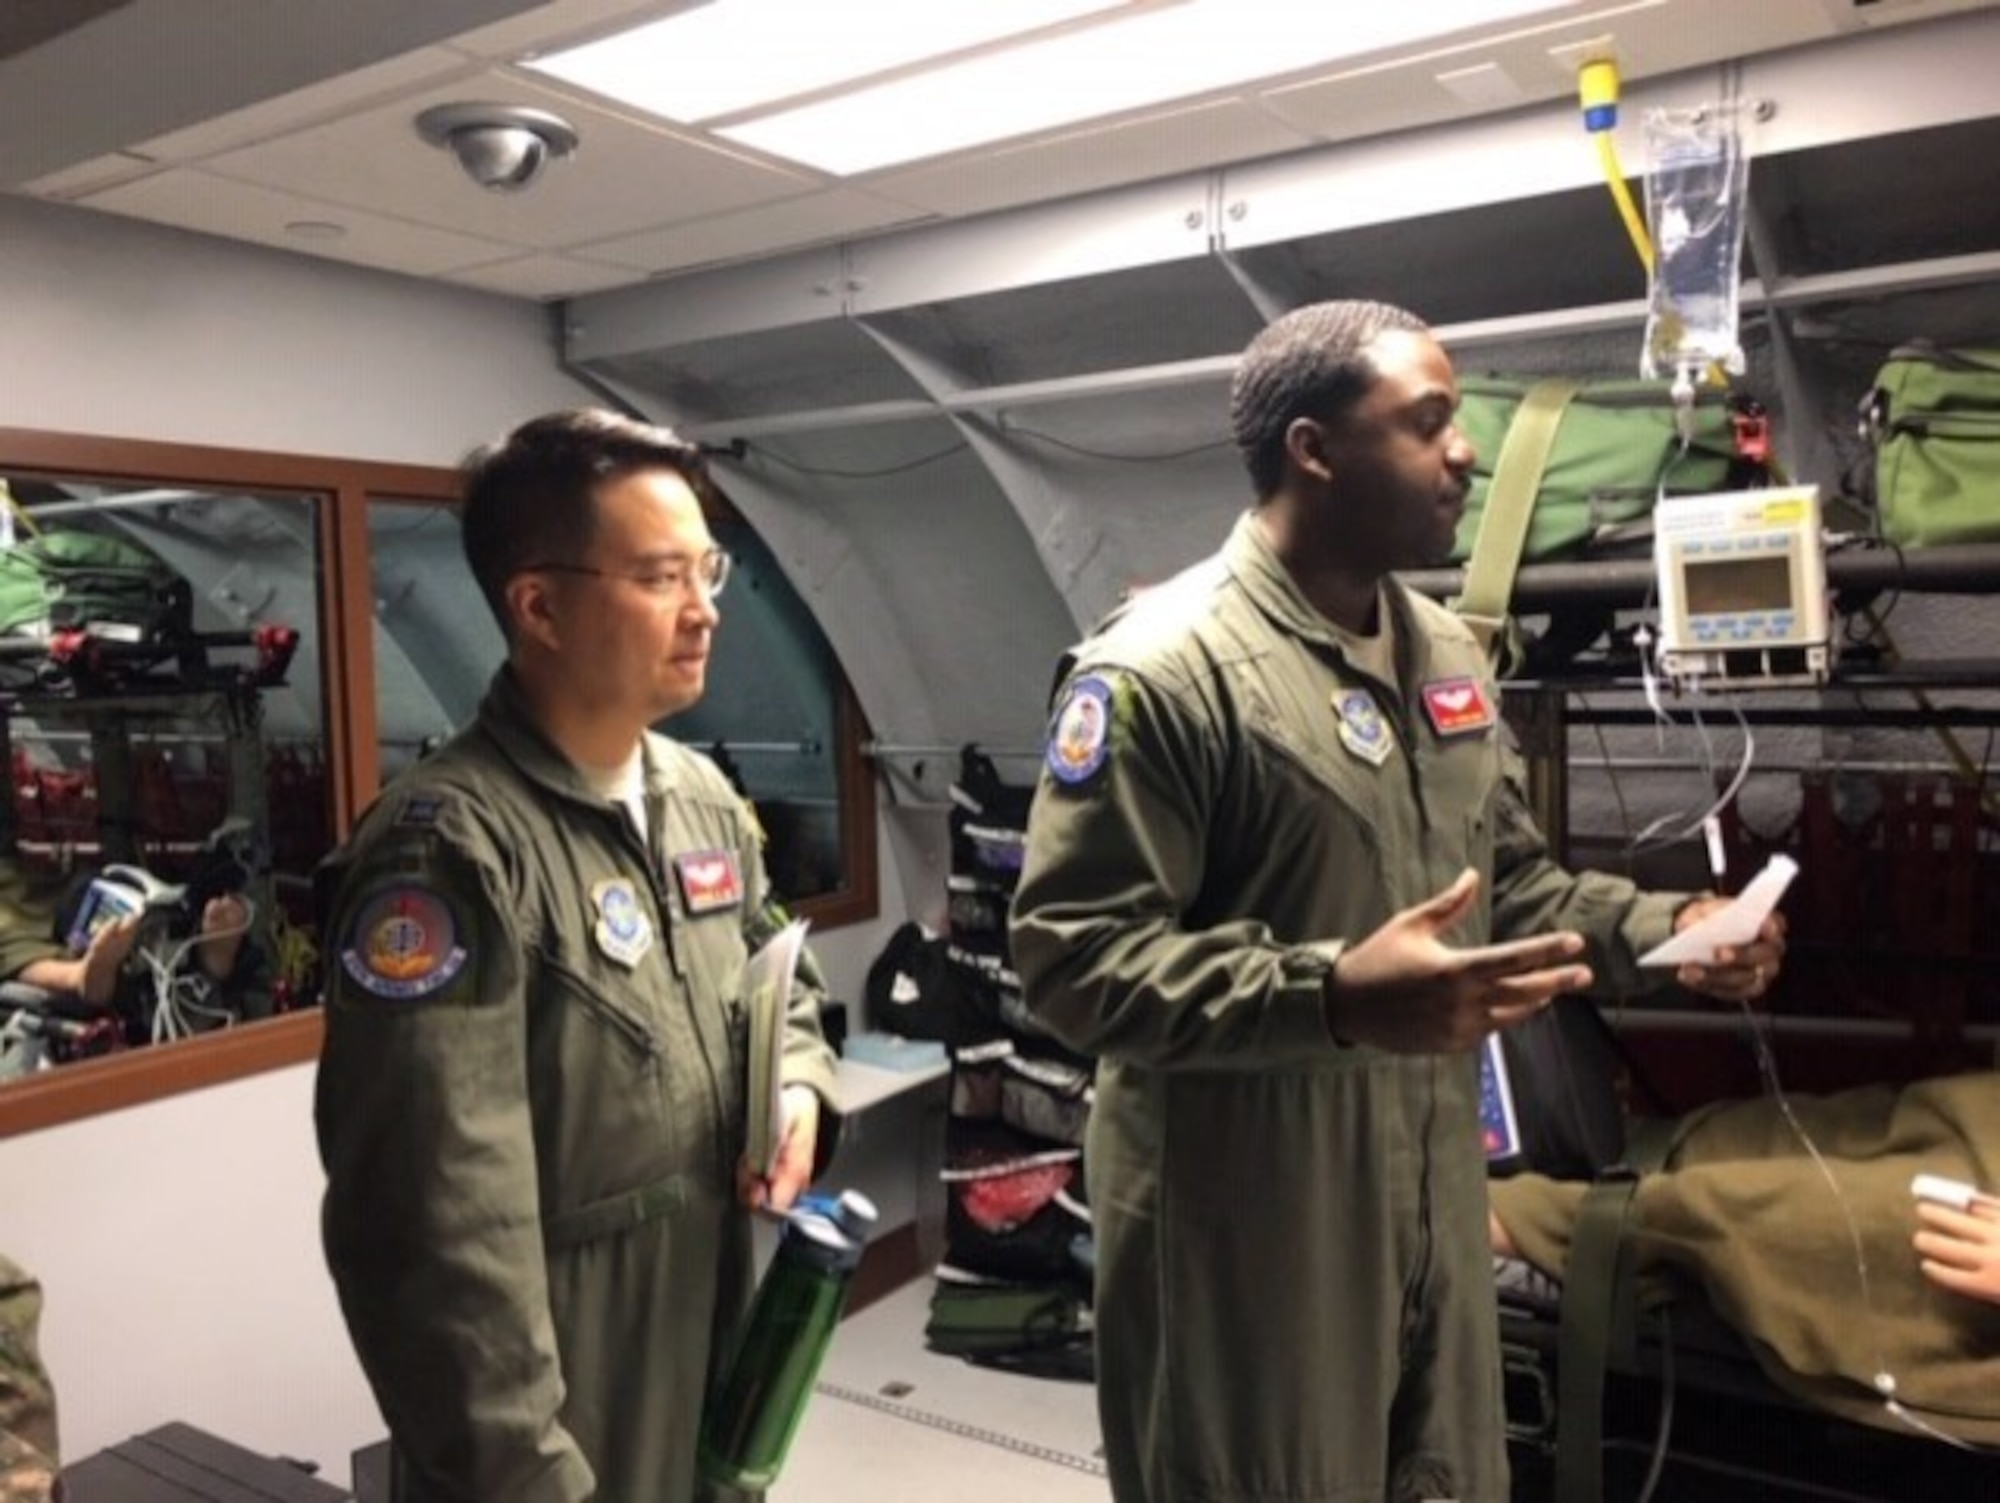 “LEAP has really been a retention tool and allowed me to use my language and cultural capabilities in the Air Force,” Maj Yim said.